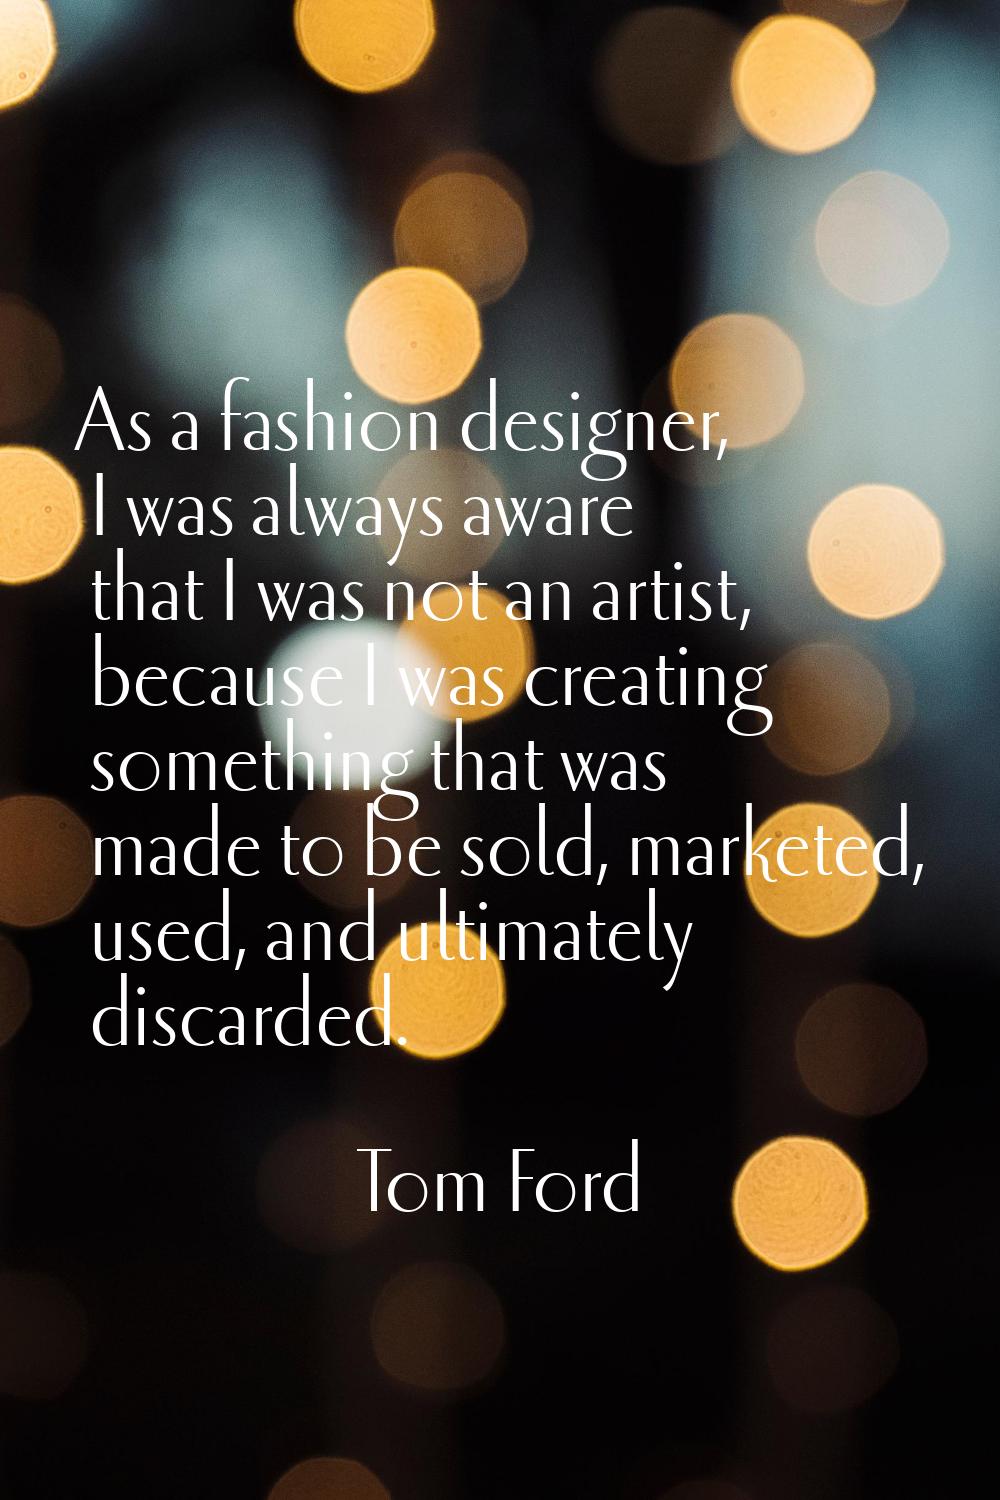 As a fashion designer, I was always aware that I was not an artist, because I was creating somethin